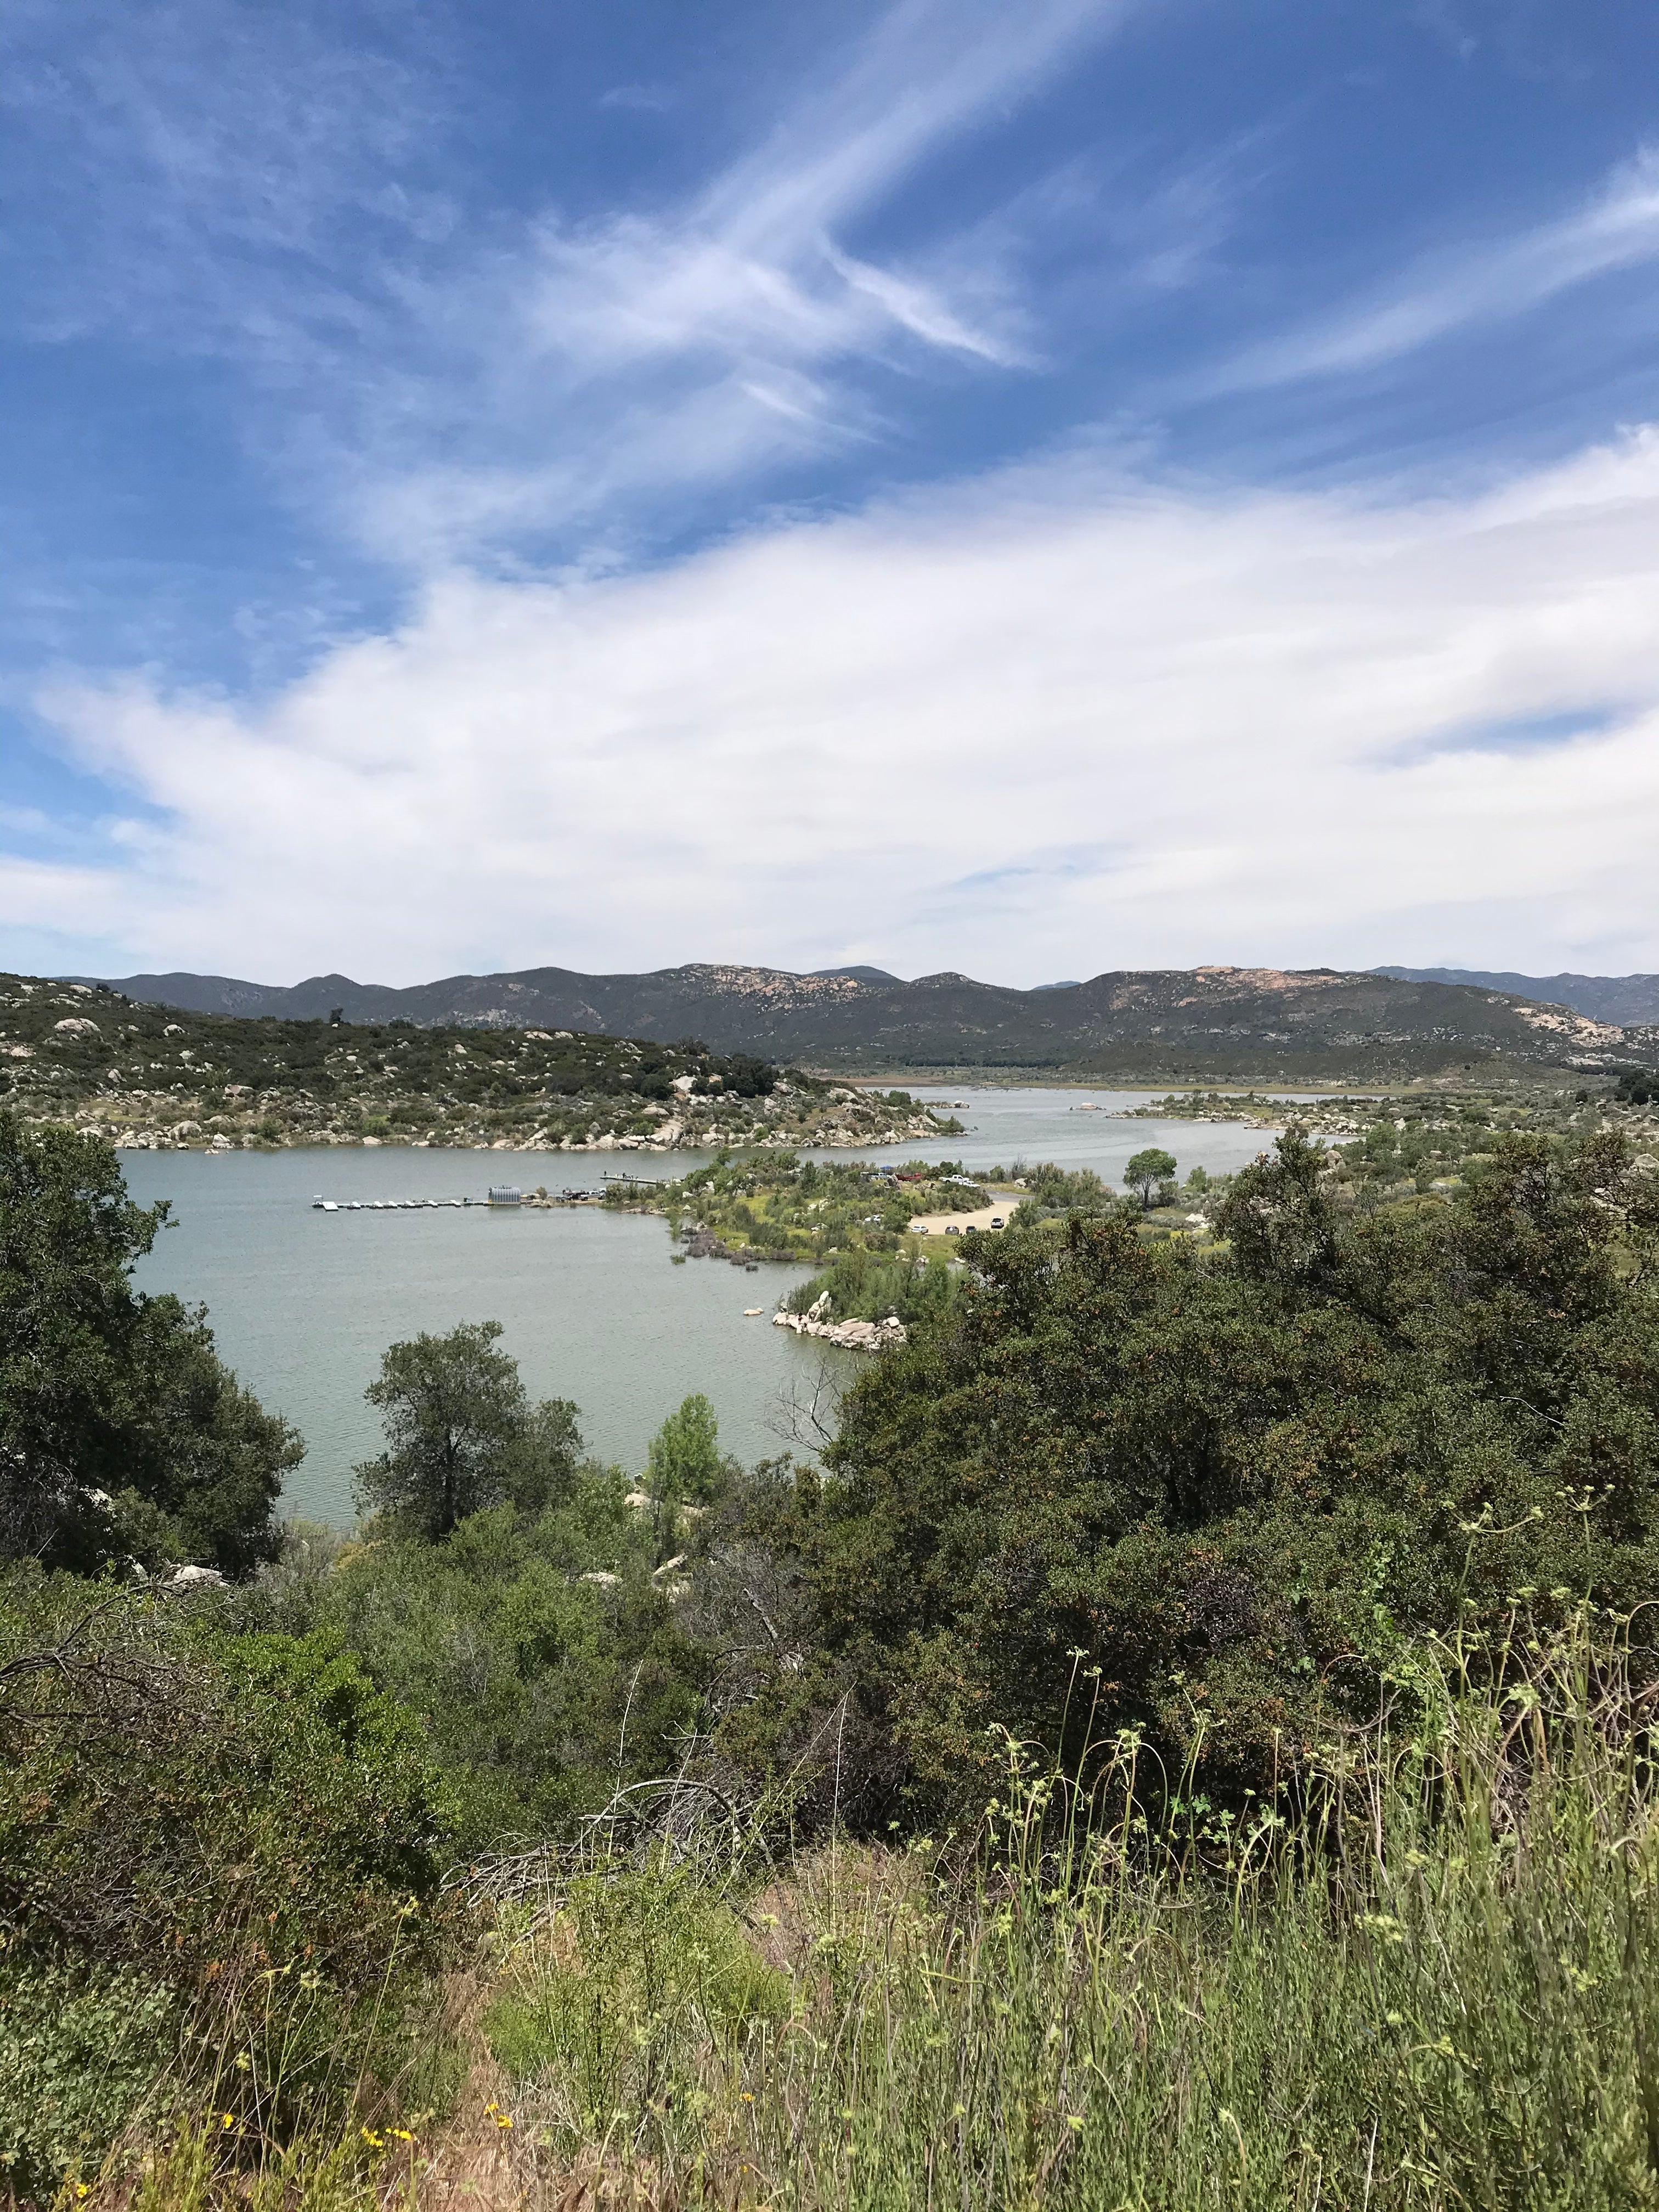 Camper submitted image from San Diego County Lake Morena County Park - 5